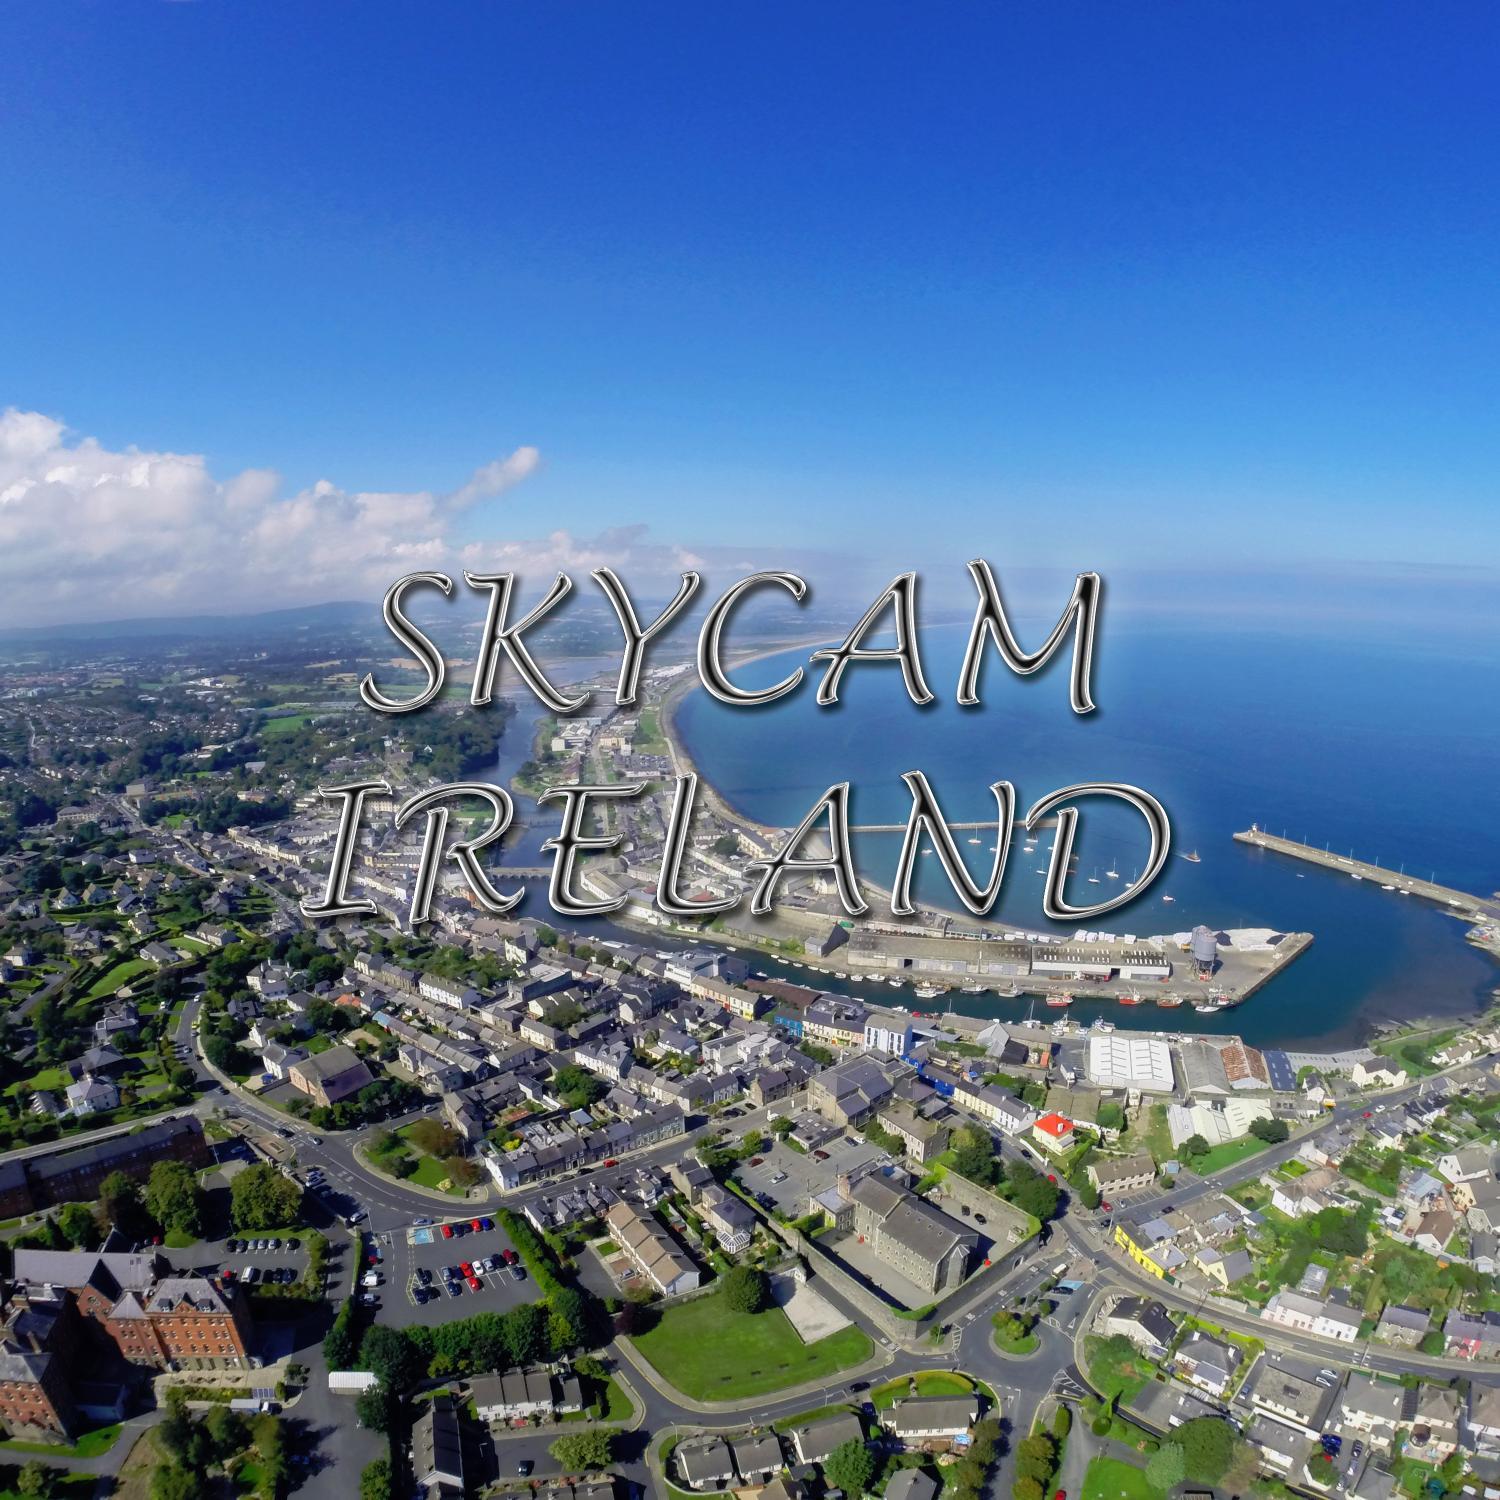 Aerial videography and photography. Fully insured and IAA approved. 
Email: skycamireland@gmail.com